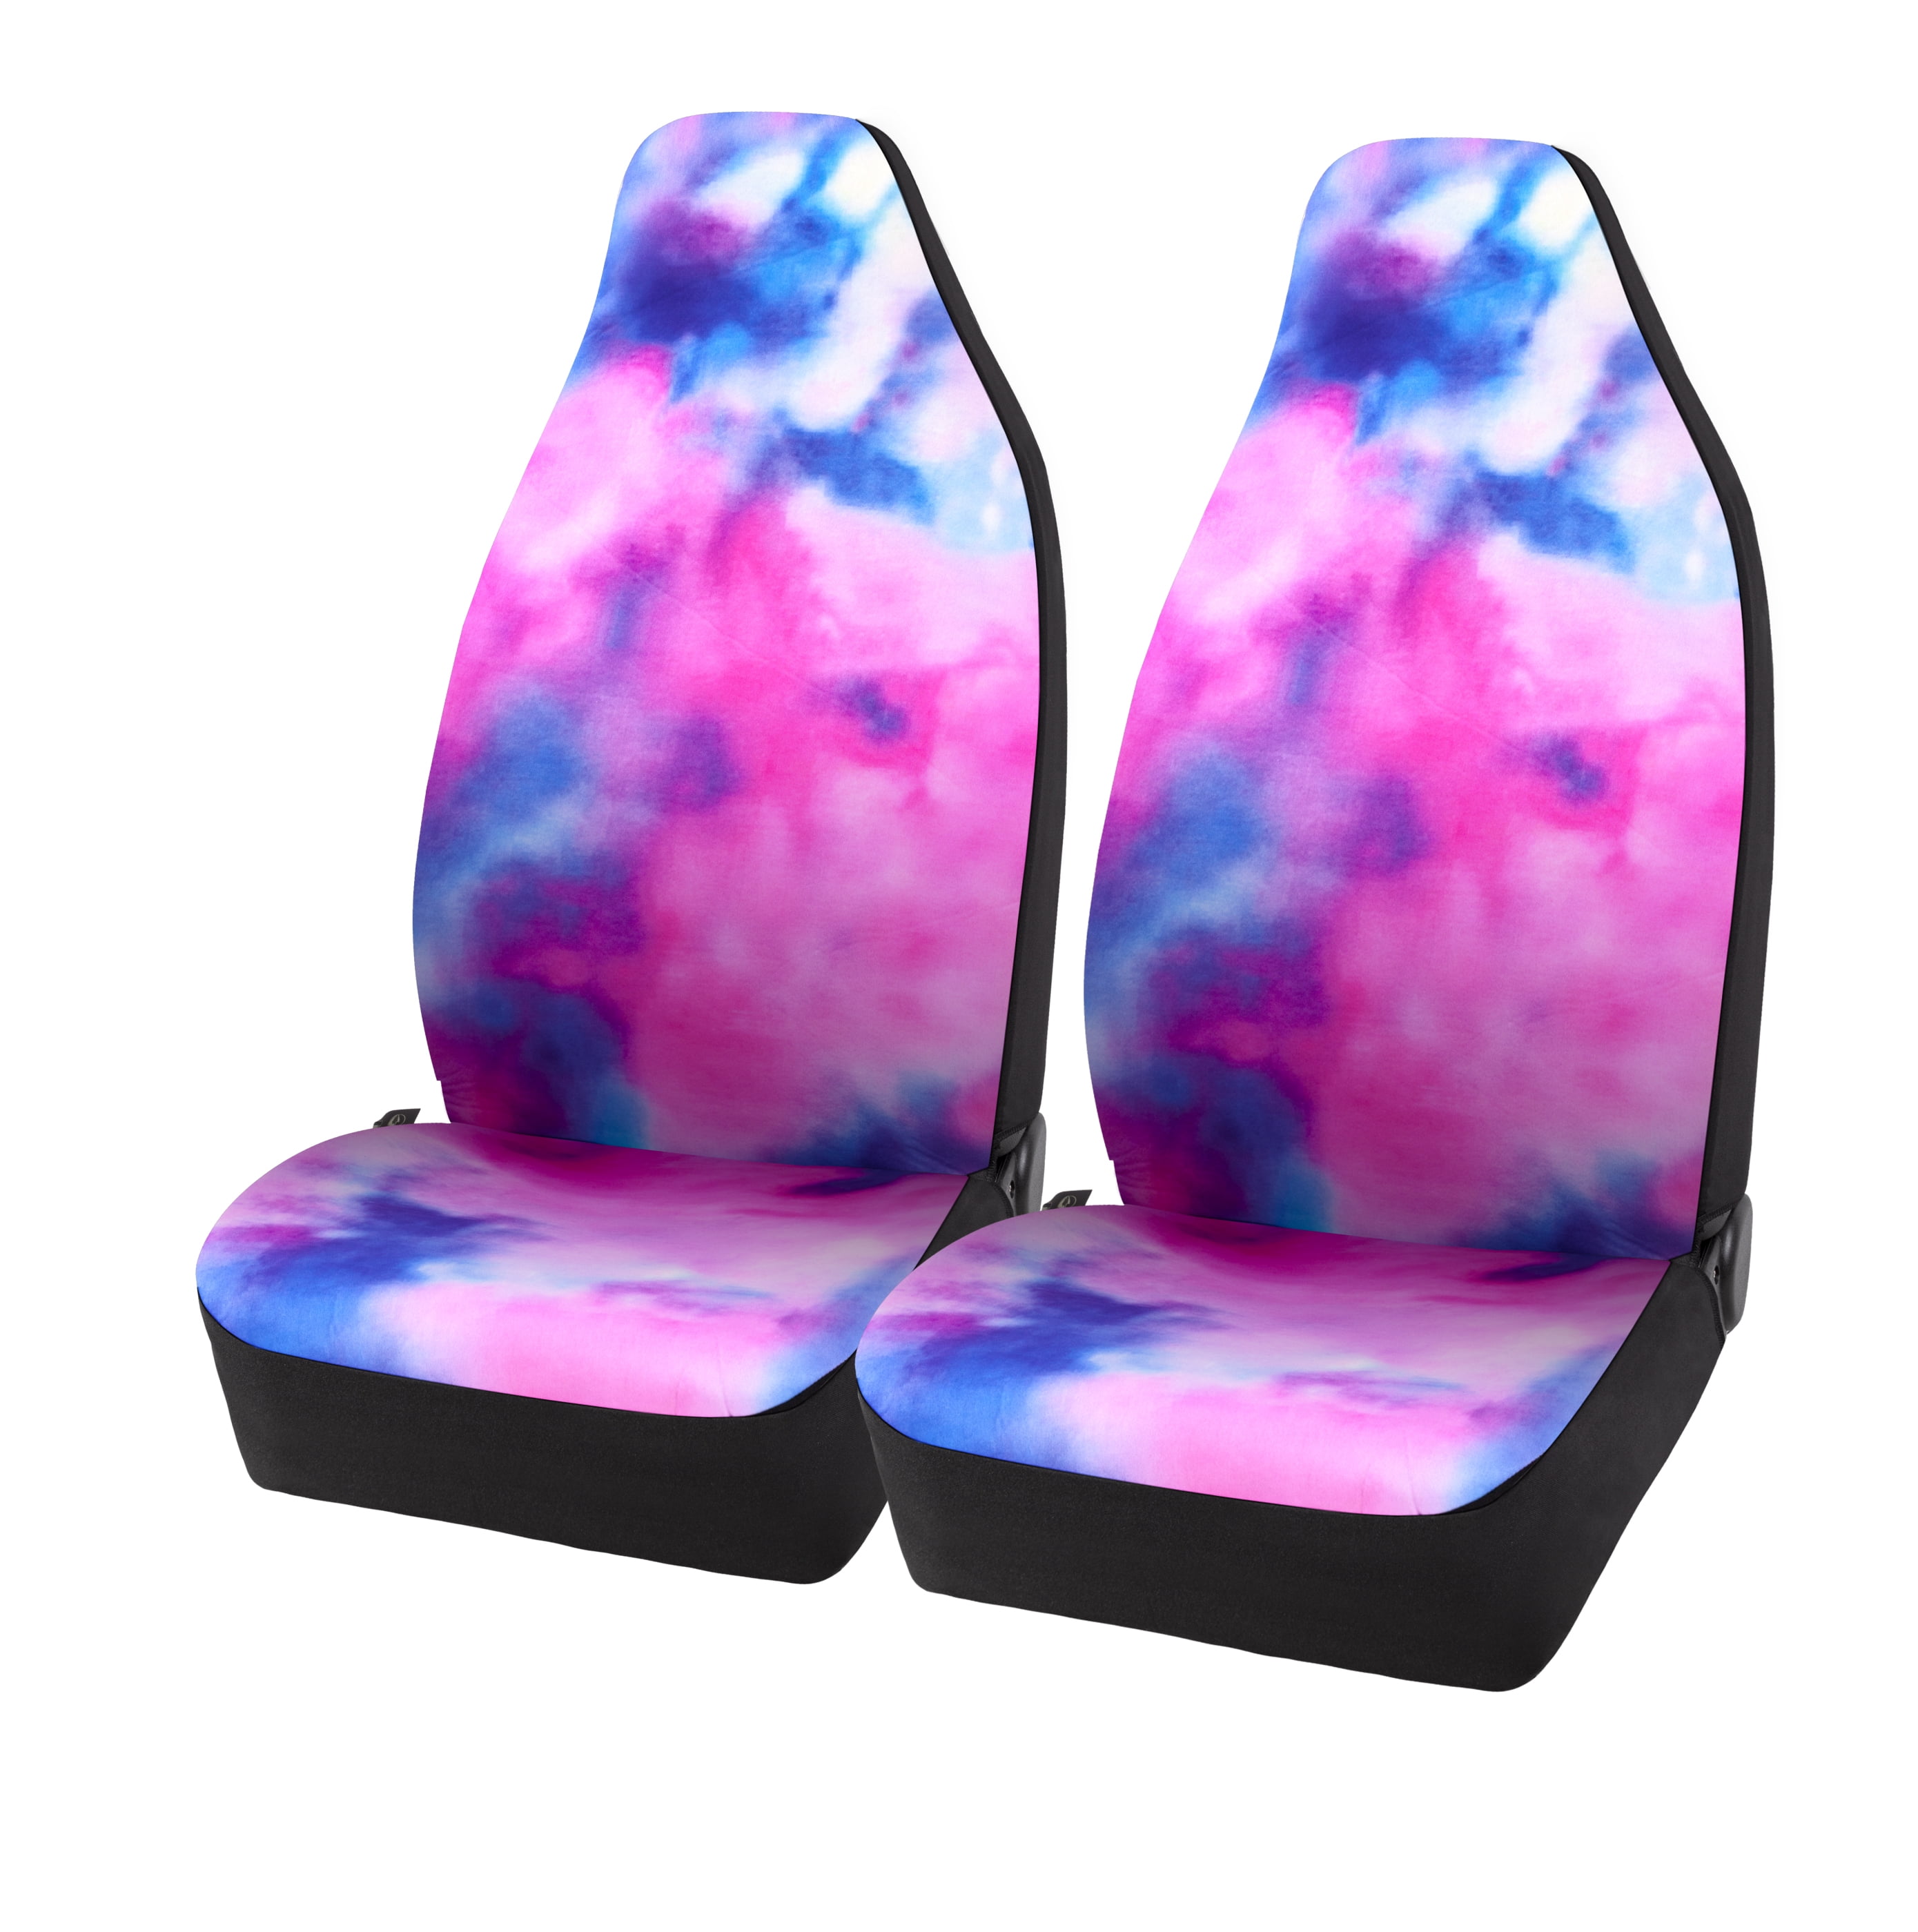 Auto Drive 5 Piece Seat Cover Kit Summer Sunset Tie Dye Colorful Polyester, Universal Fit, 2030SC01